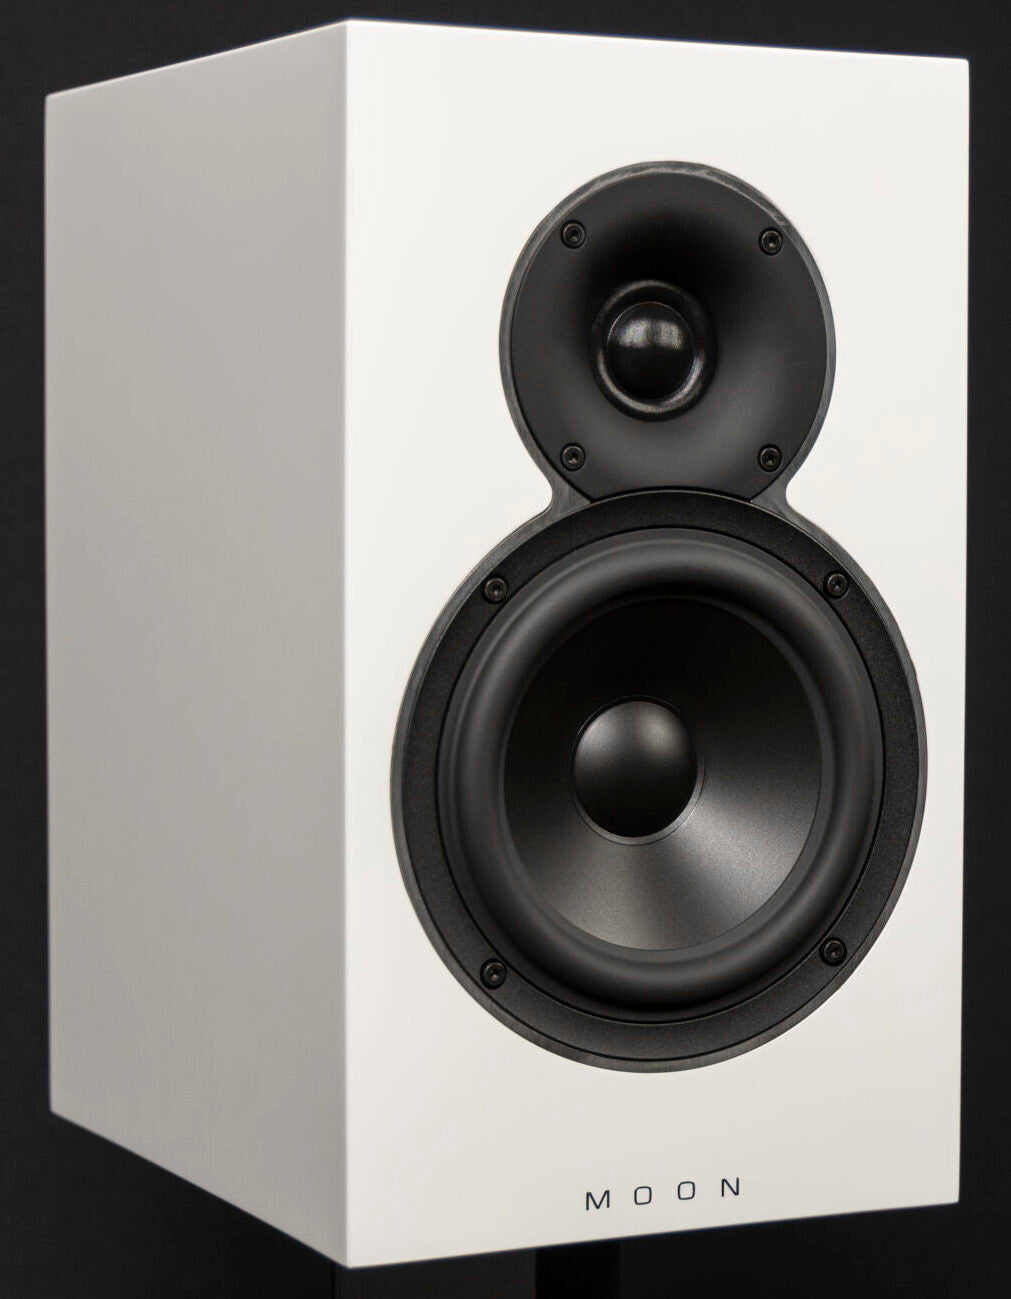 Moon by Simaudio Voice 22 Loudspeakers (available to demo)